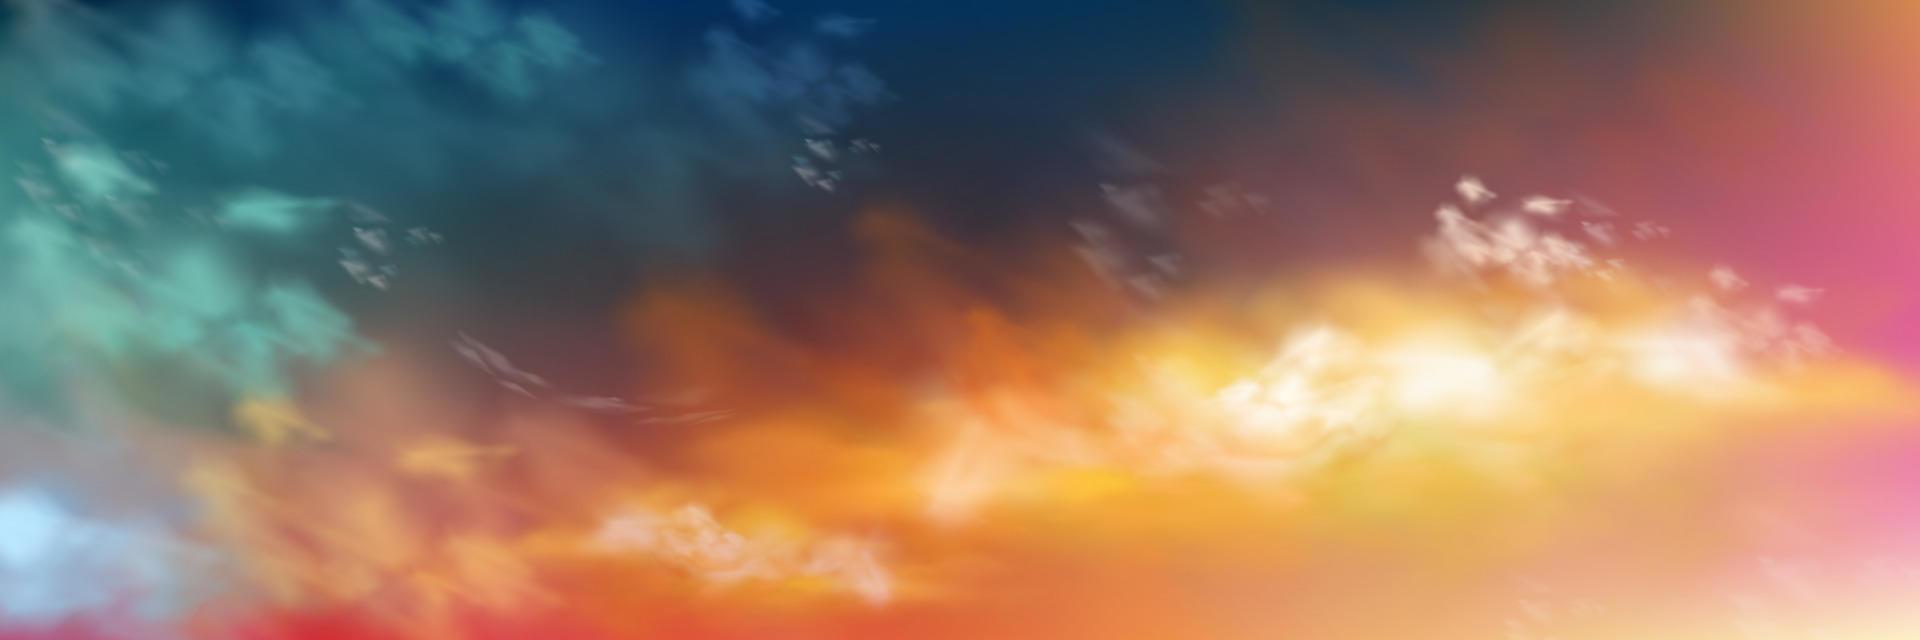 Sunset sky with realistic cloud texture vector